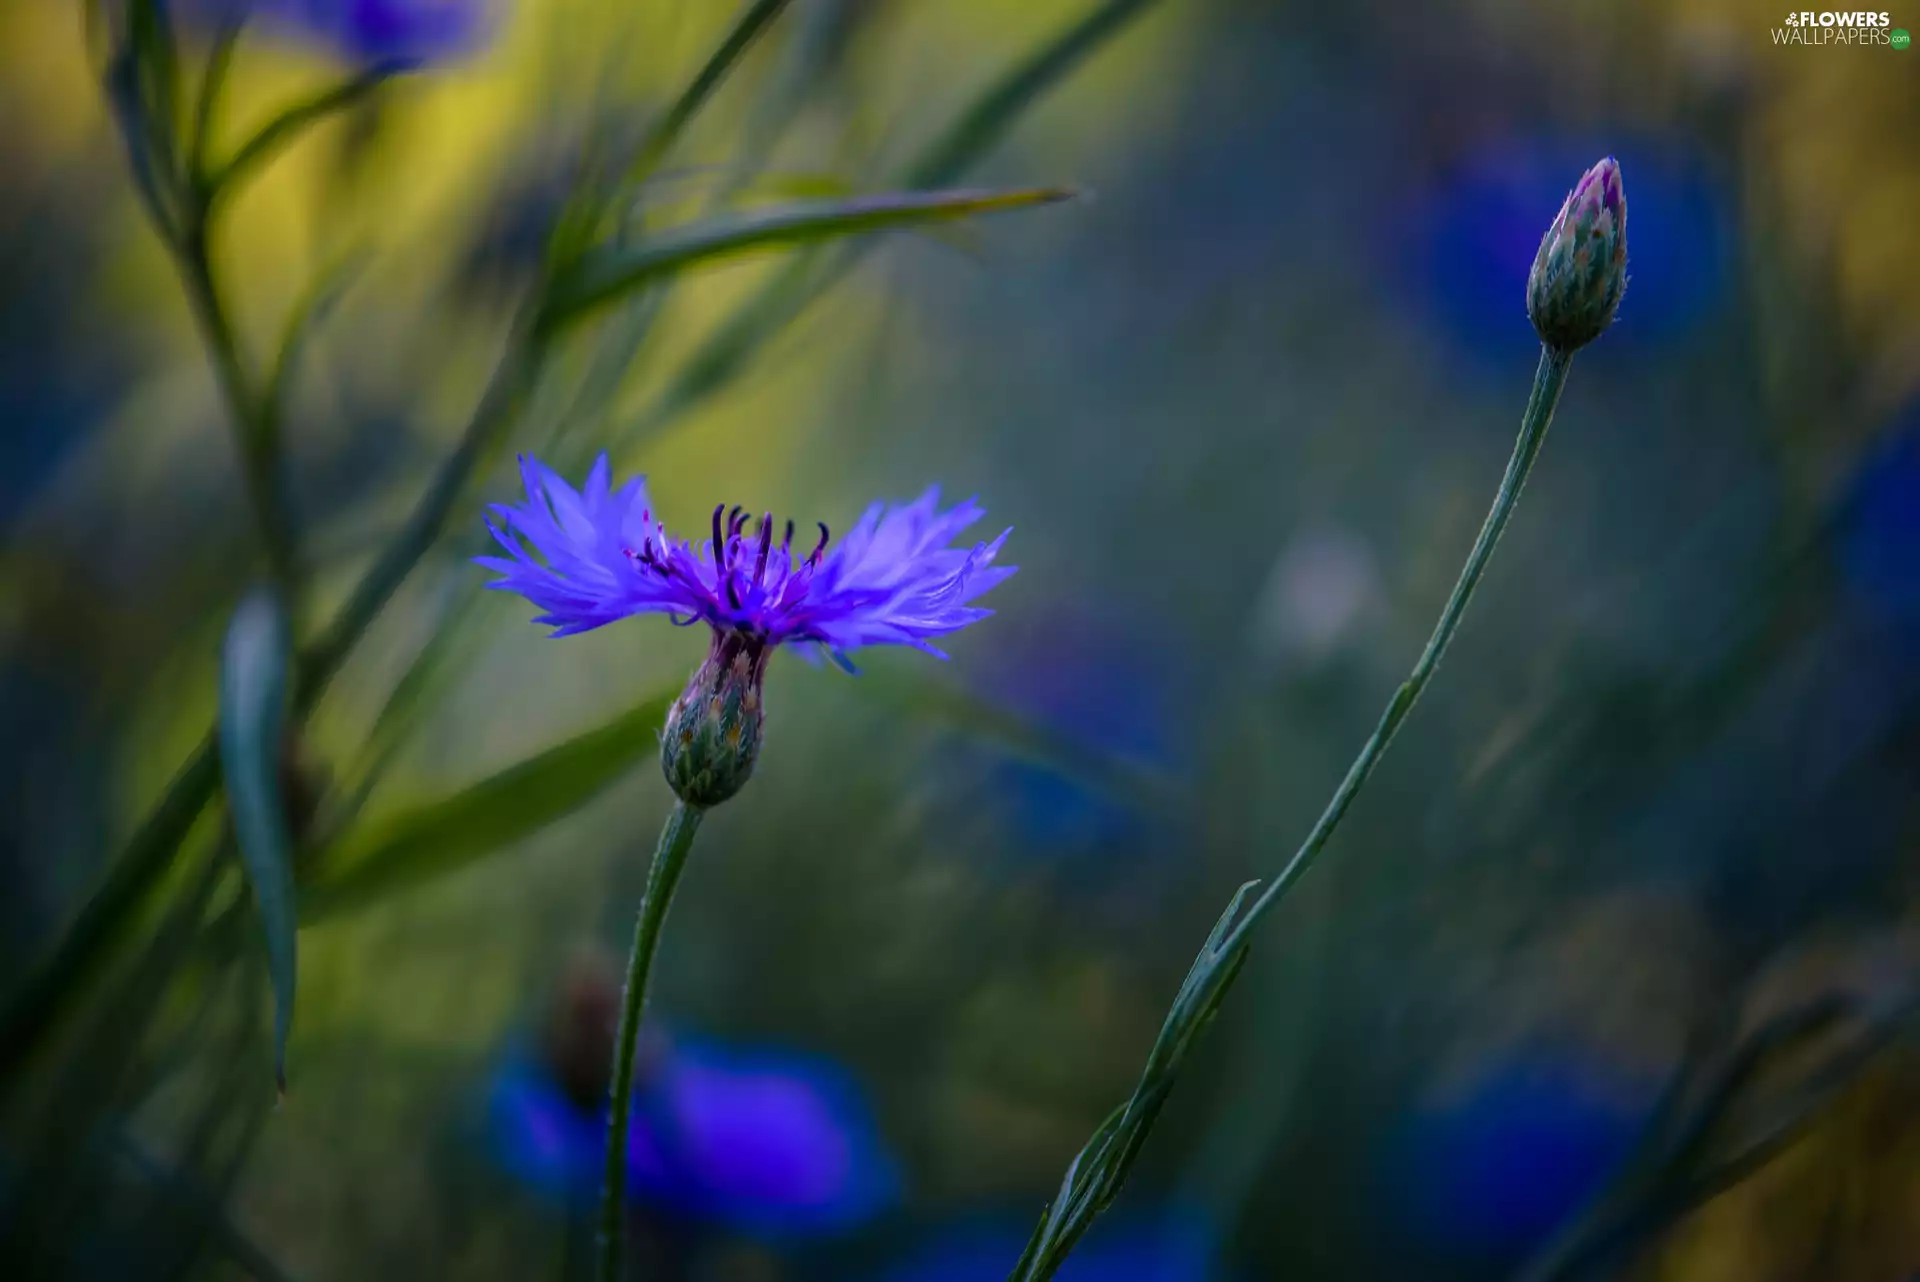 Chaber, bud, blurry background, Colourfull Flowers